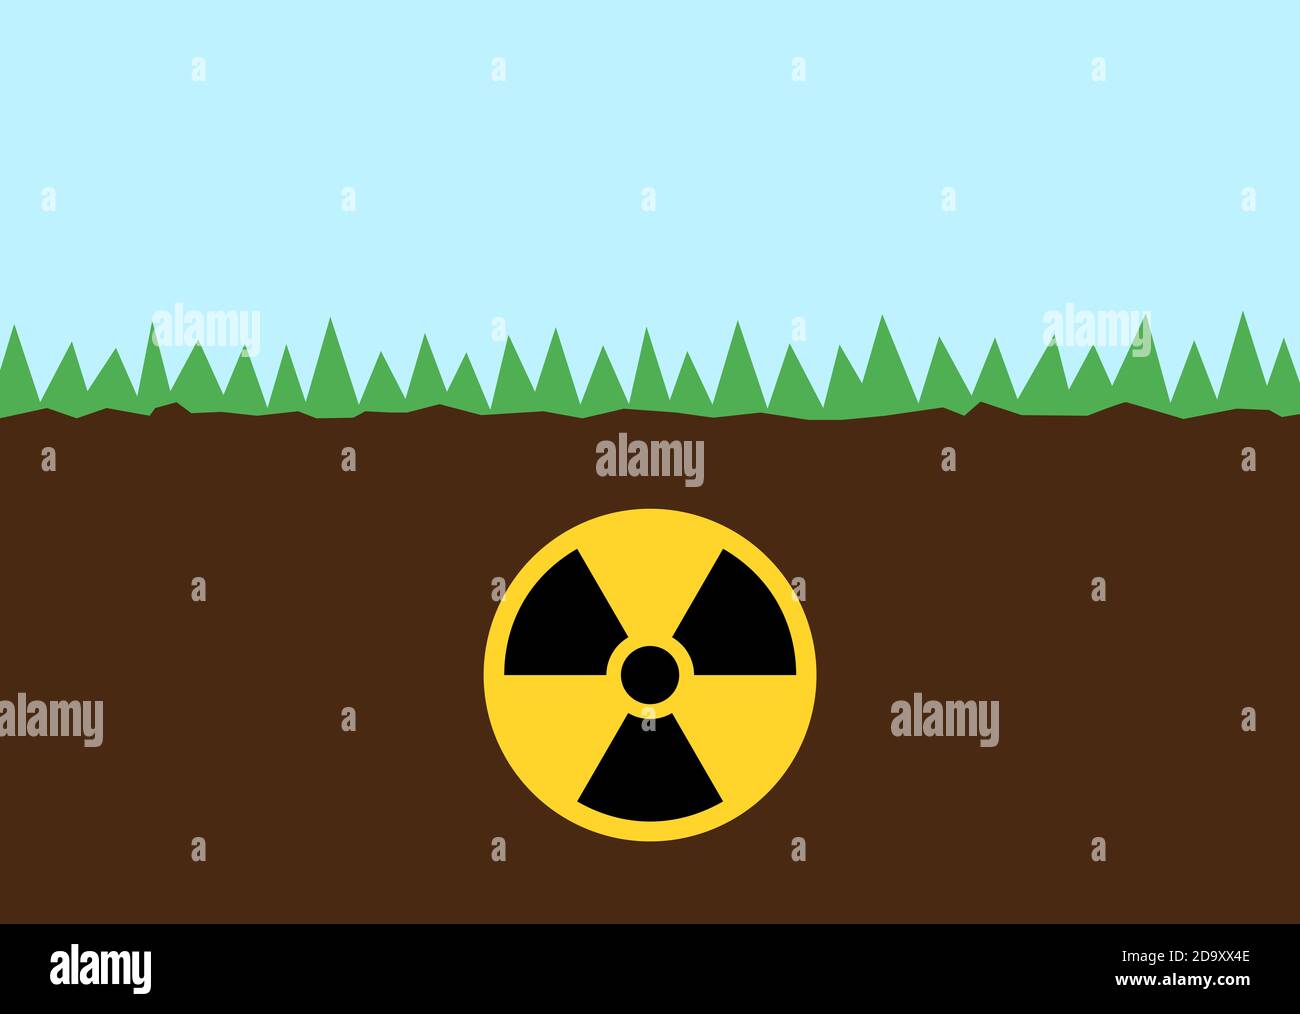 Soil and ground is contaminated, toxic and polluted by radioactive radioactivity and nuclear radiation. Vector illustration. Stock Photo